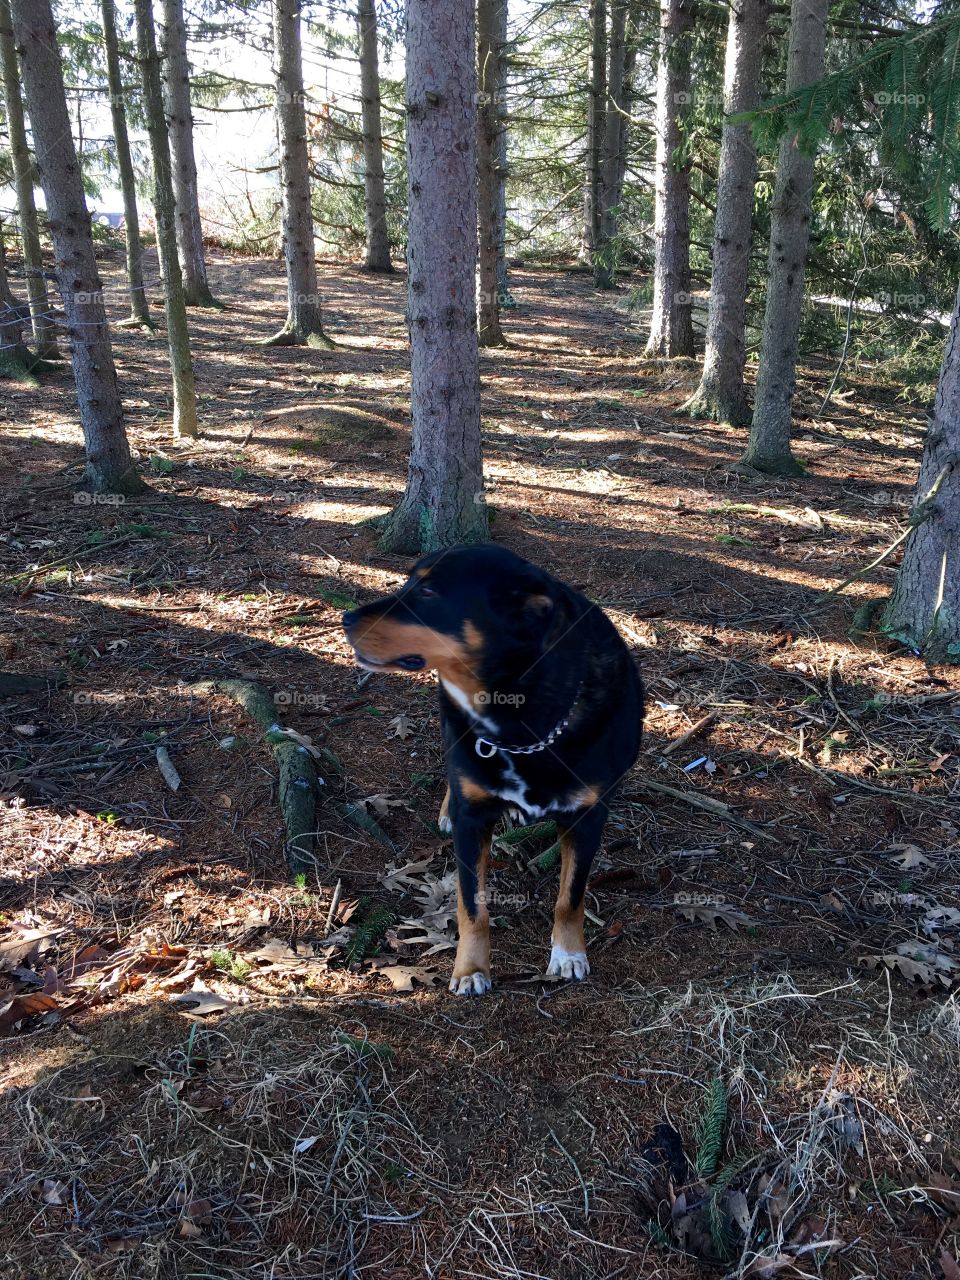 "Bear" in the Forest!